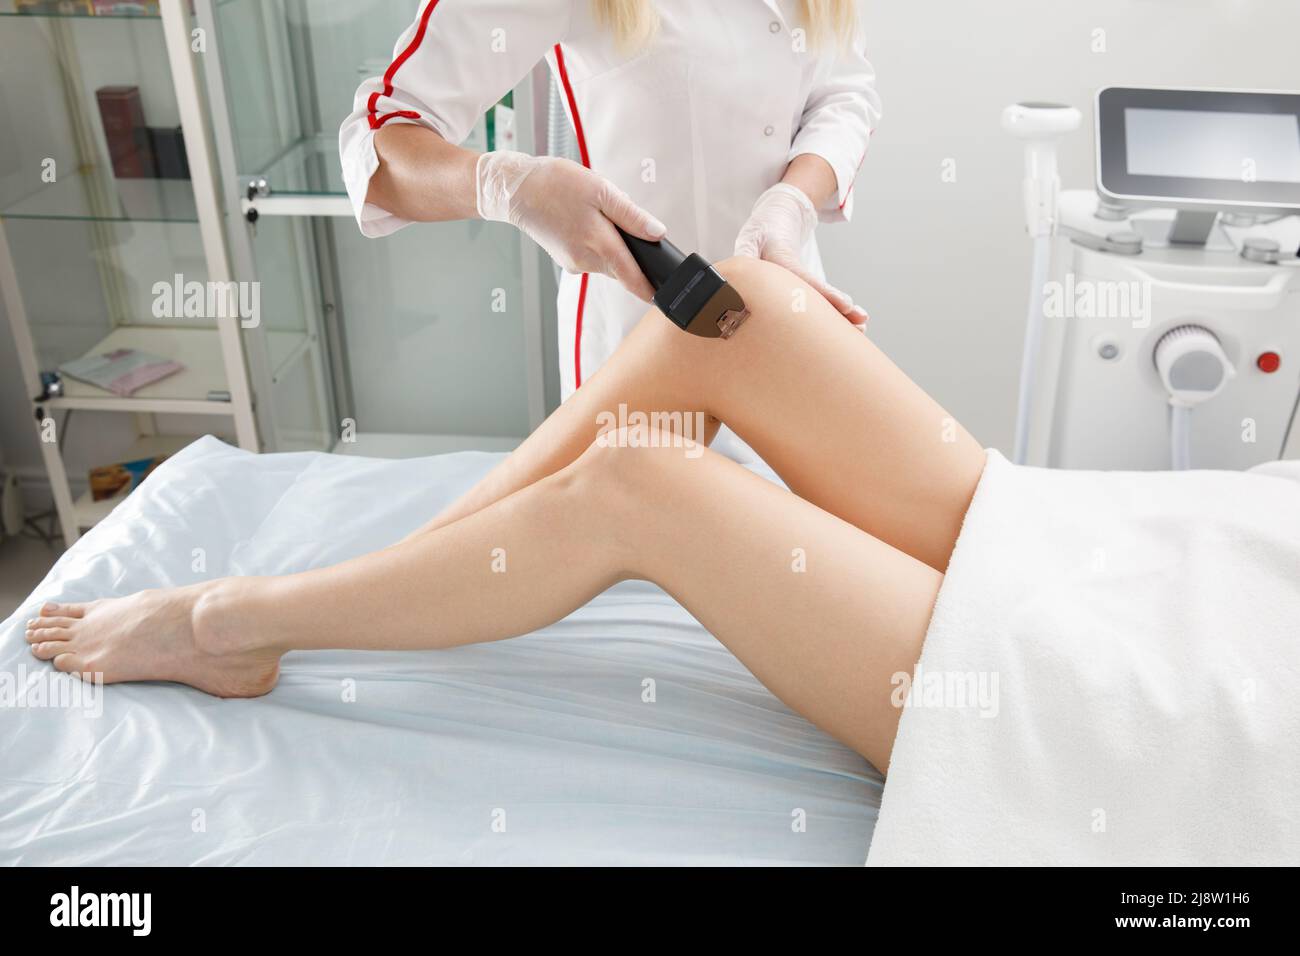 A woman undergoes an anti-cellulite procedure in a cosmetology clinic. Stock Photo